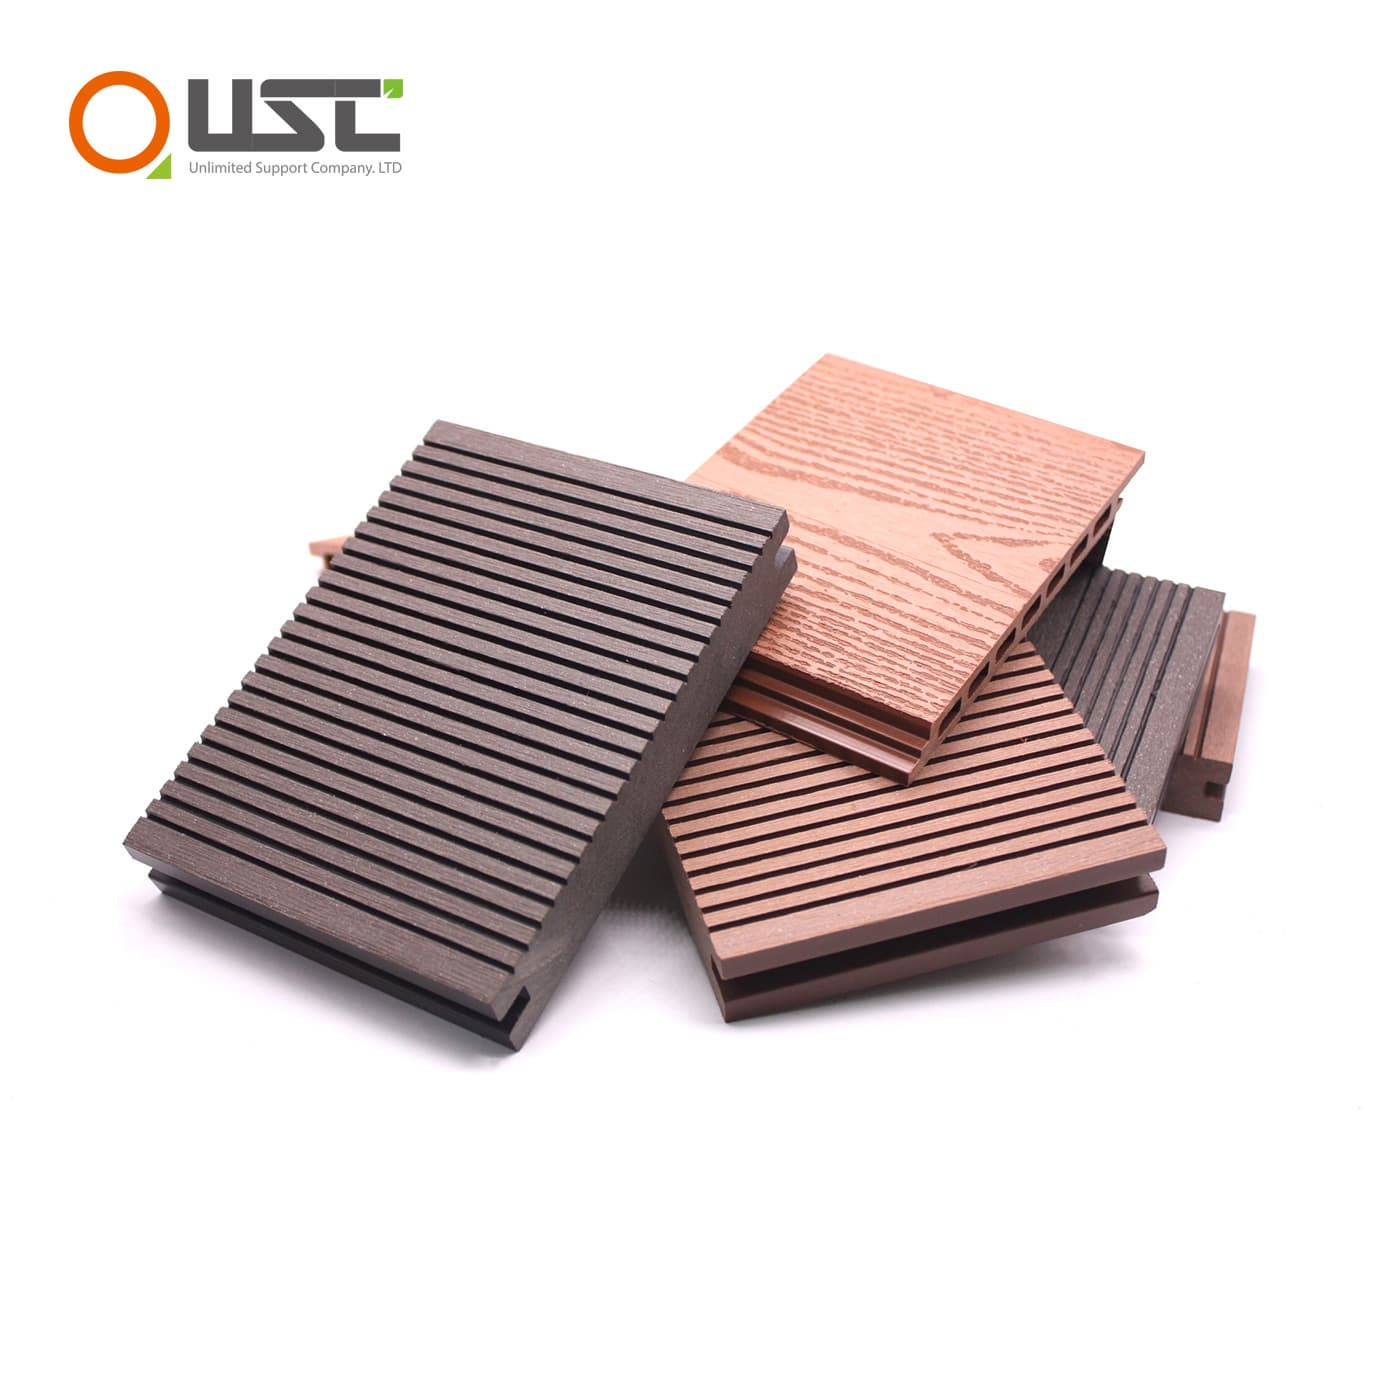 USC WOODCORE WPC Decking_Made in USC KOREA